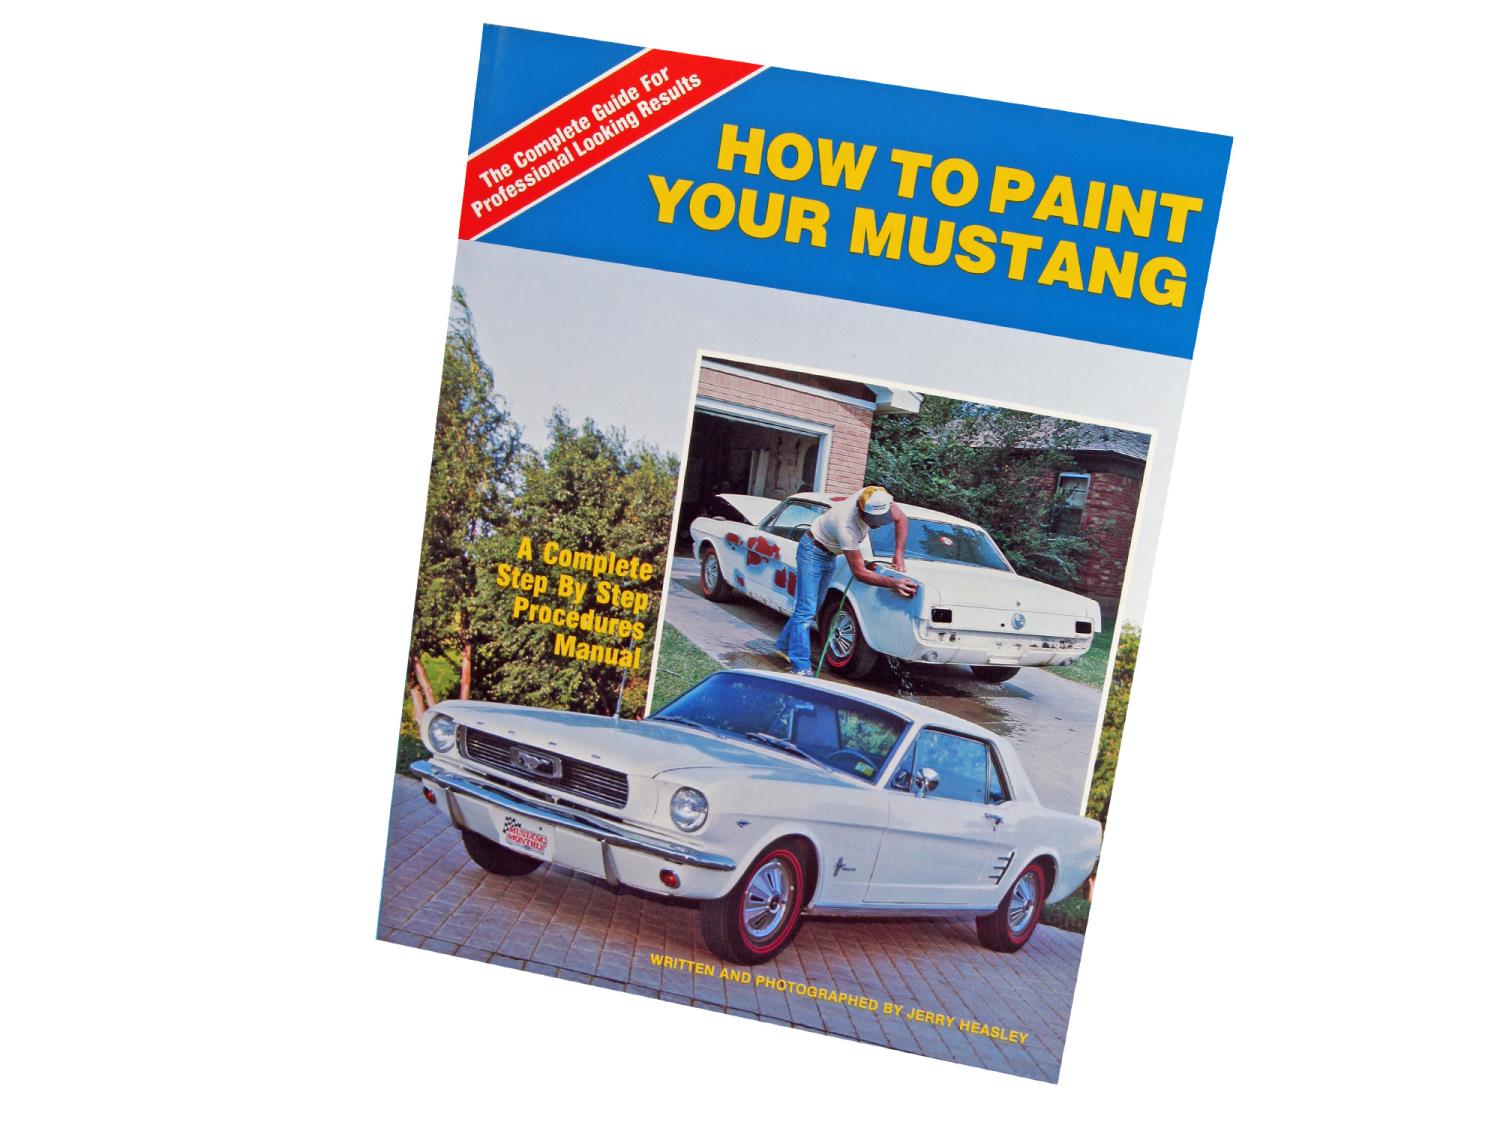 HOW TO PAINT YOUR MUSTANG